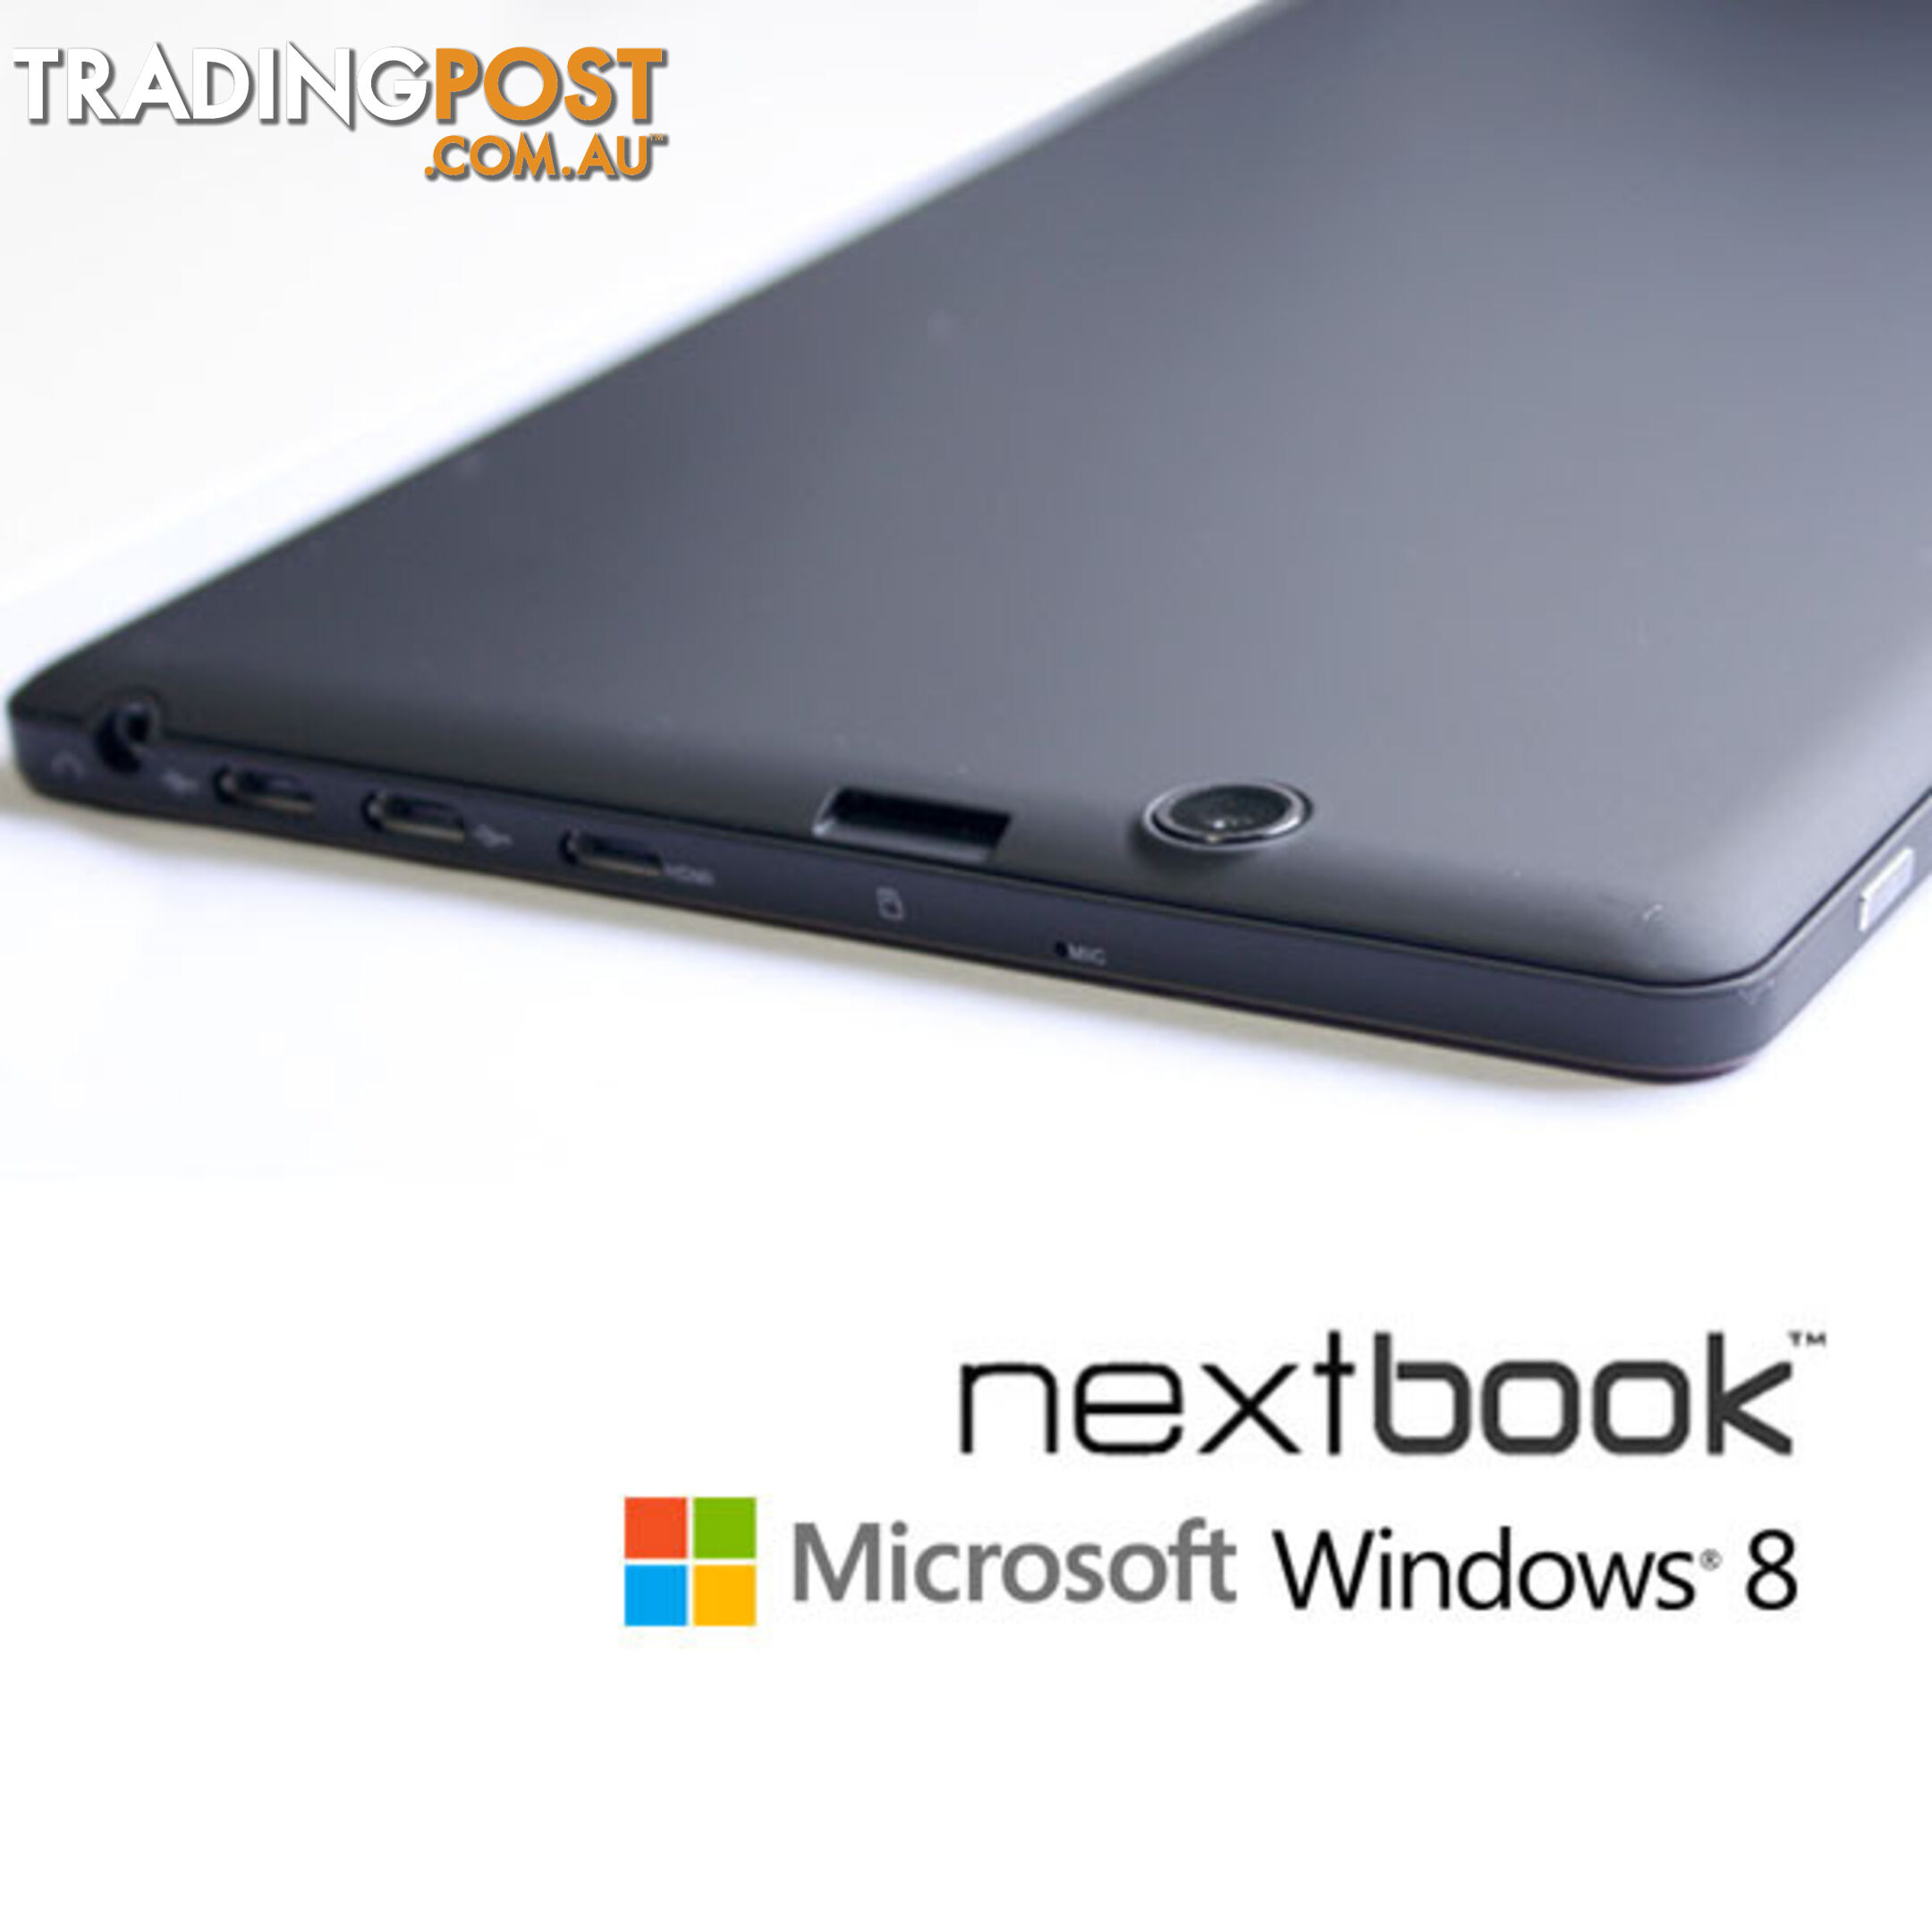 Nextbook 10.1 Inch 32G/Windows 8.1 with Bing/Quad Core with HDMI Output Tablet PC (M1012BCP)  Refurbished